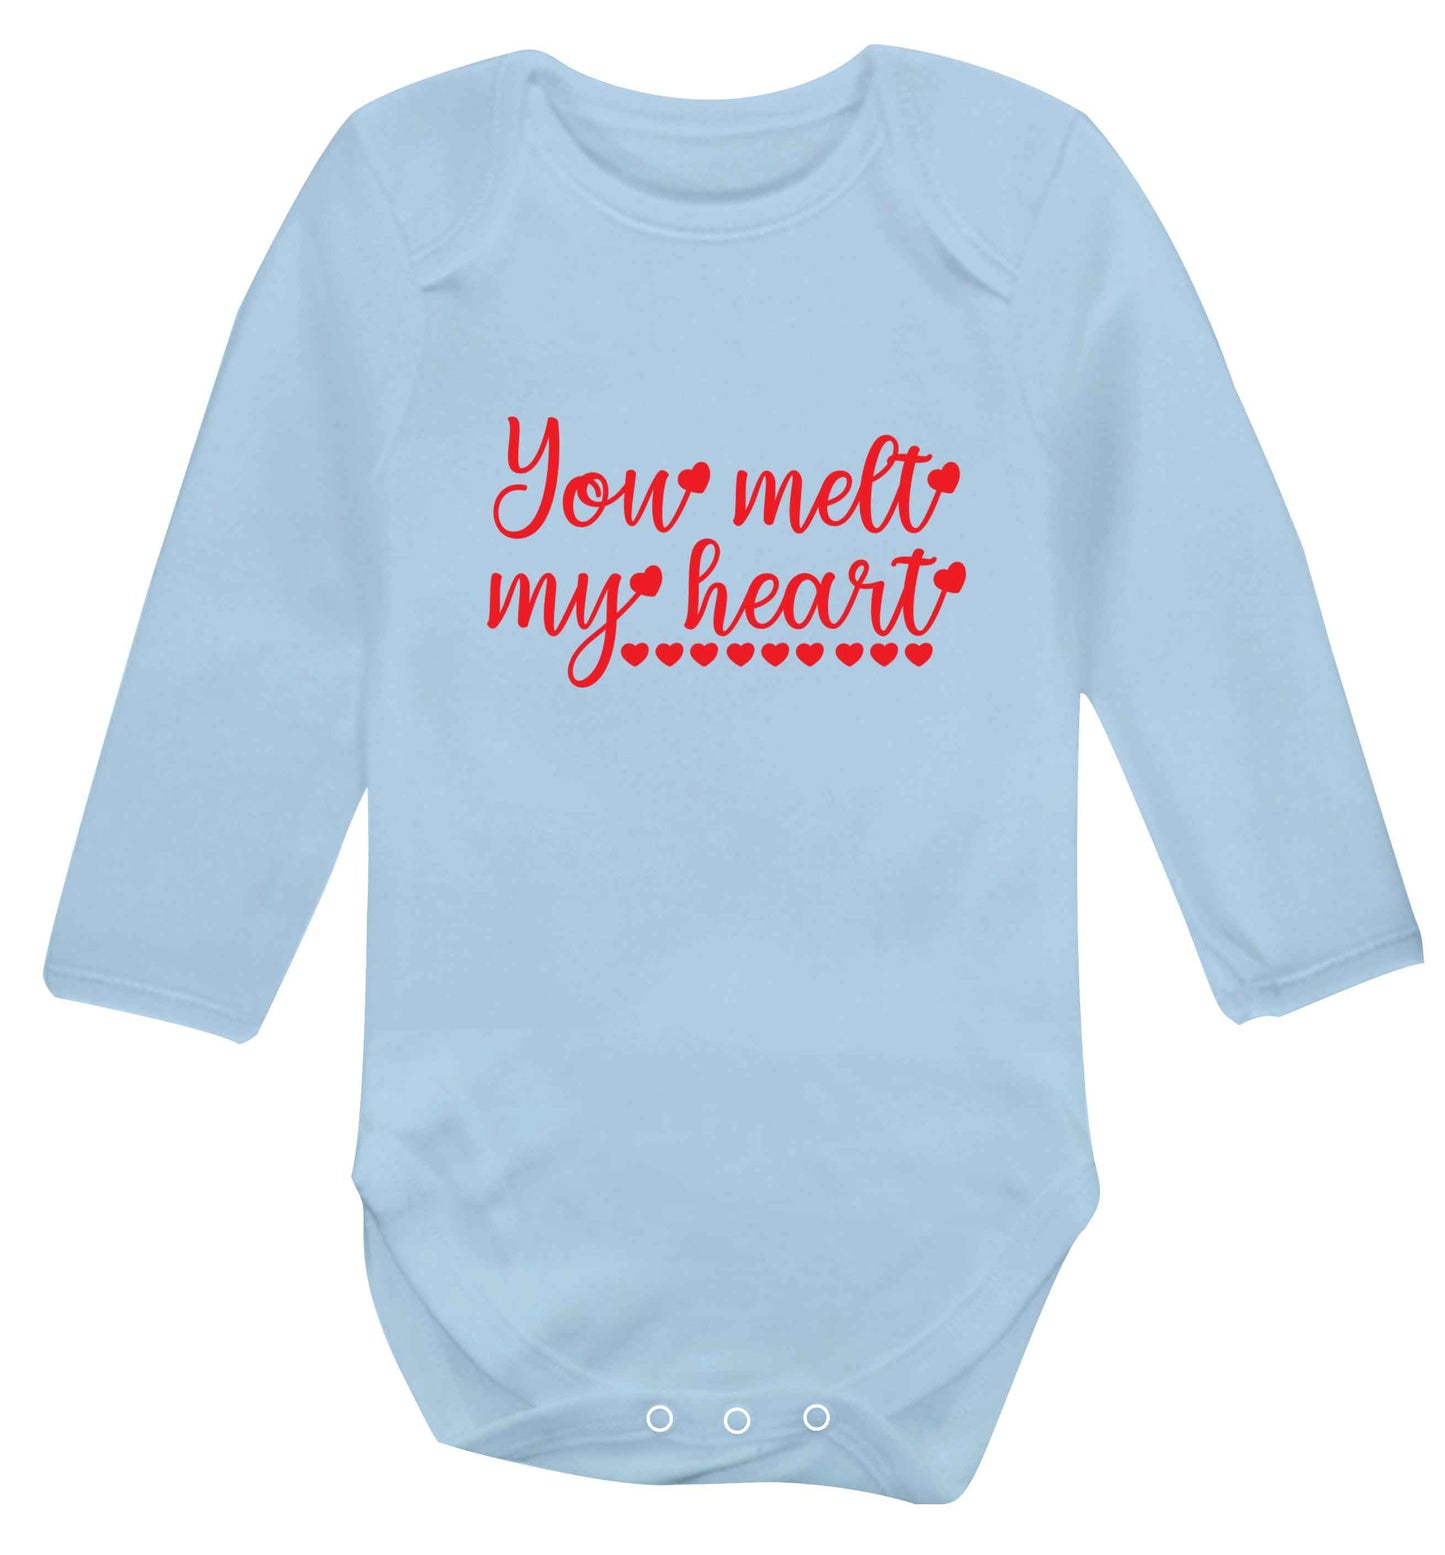 You melt my heart baby vest long sleeved pale blue 6-12 months